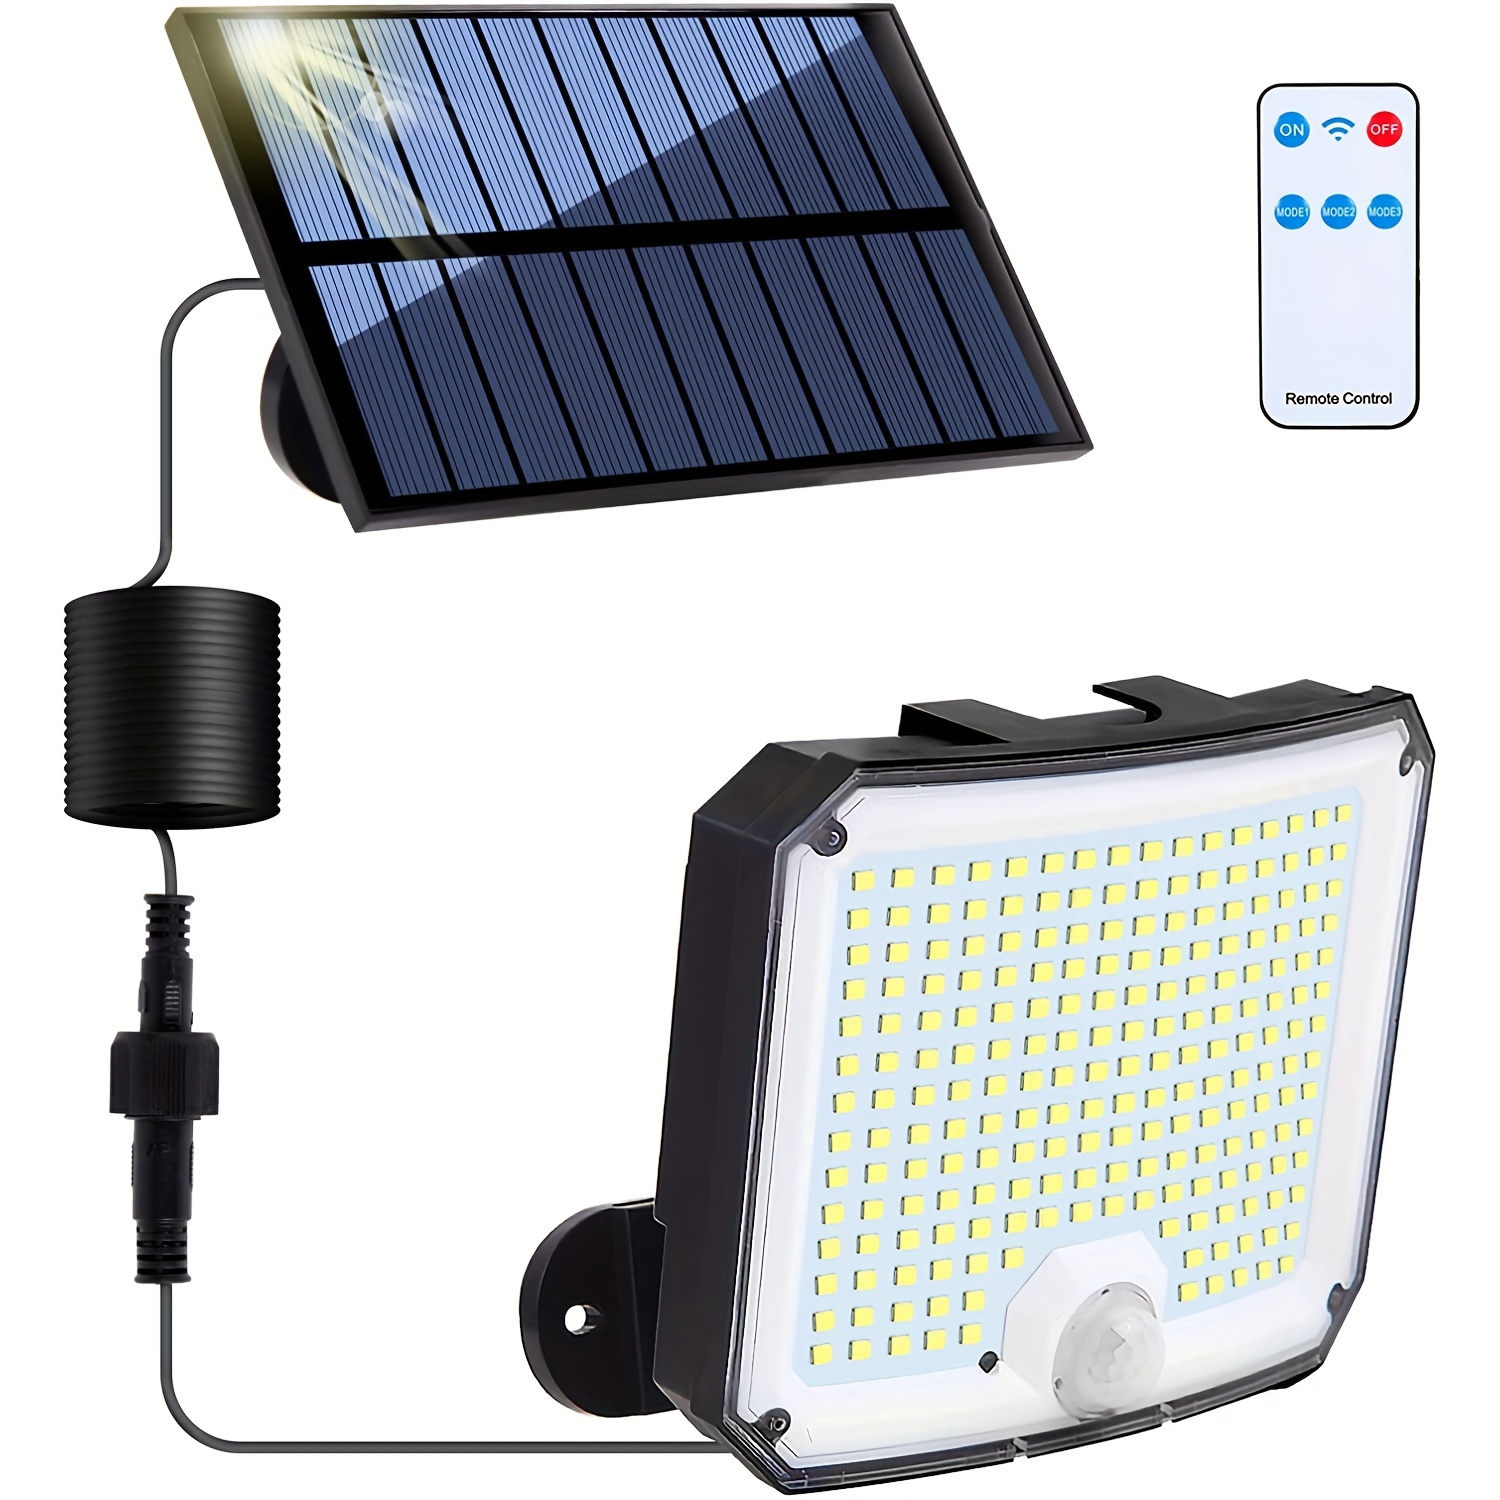 

1pc Solar Outdoor Lights, 208 Leds High Brightness Security Lights With Remote Control, Motion Sensor Waterproof Flood Wall Lights With 3 Modes For Garden Yard Pathway Garage Street Light